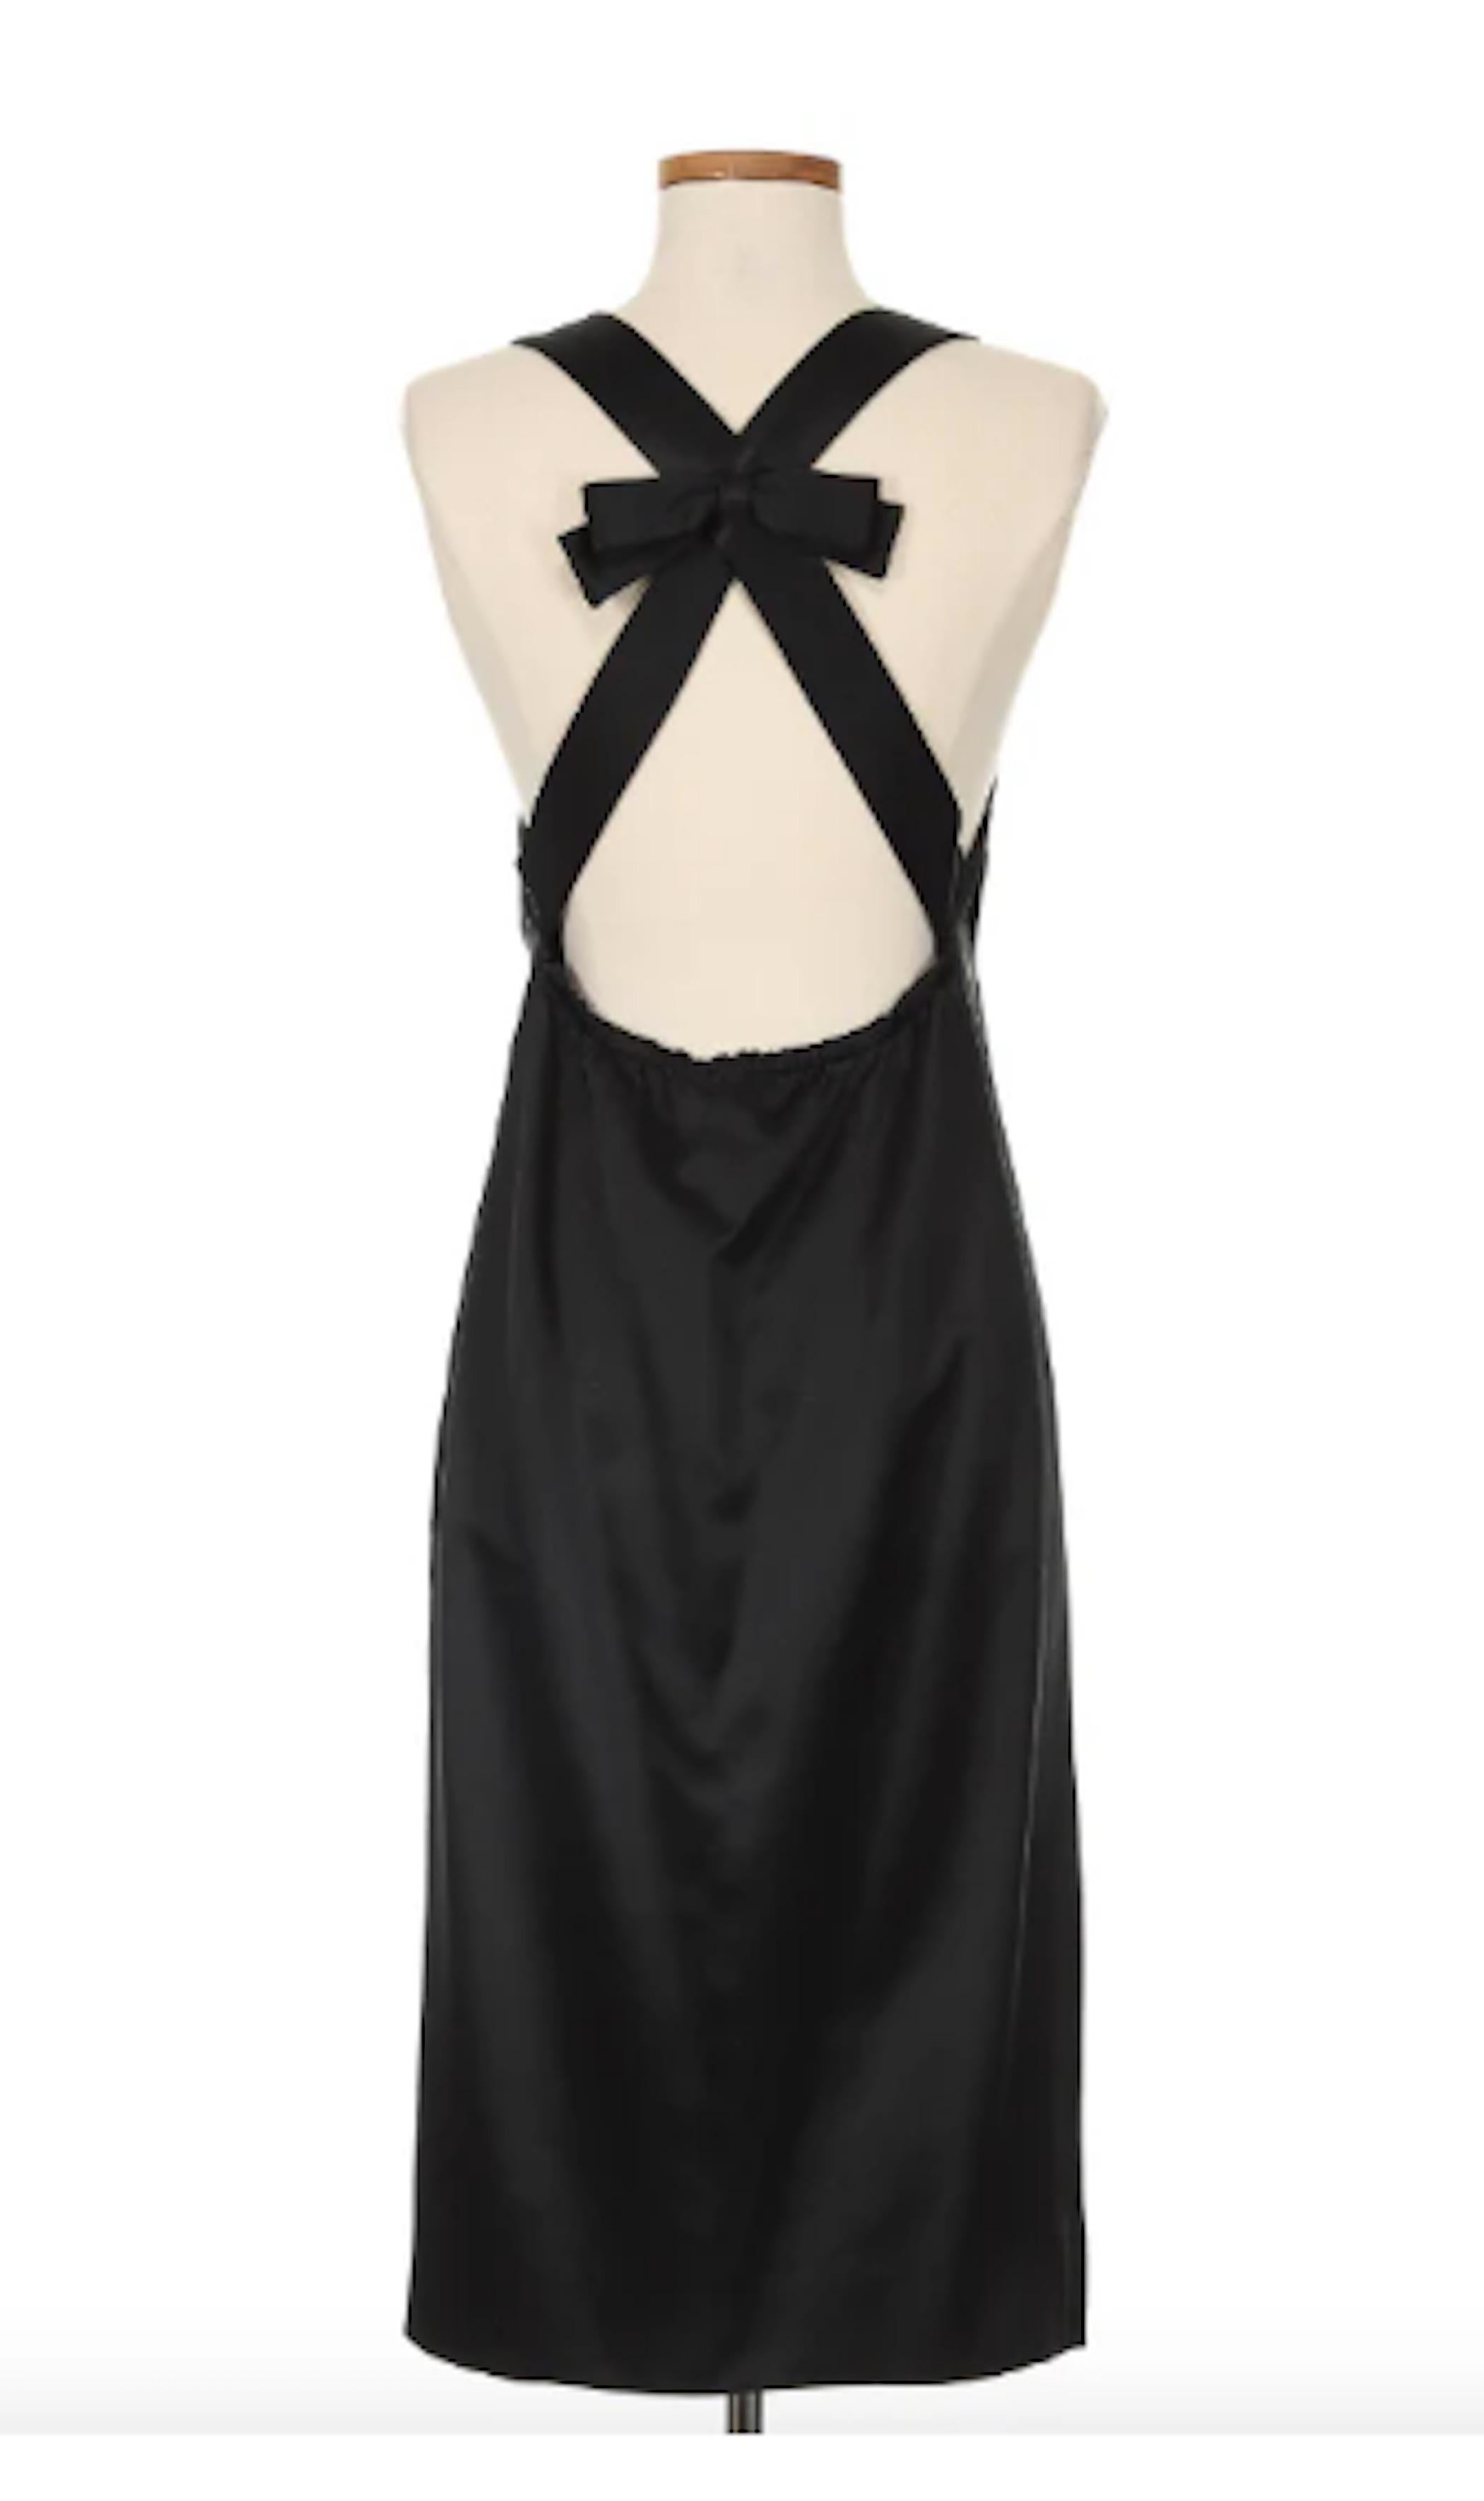 Karl Lagerfeld Silk Black Cocktail Dress. A timeless and classic piece - in a structured silhouette, this dress's added charm comes from the bow added to the back for a touch of femininity. Perfect transitional piece to take you through a night out